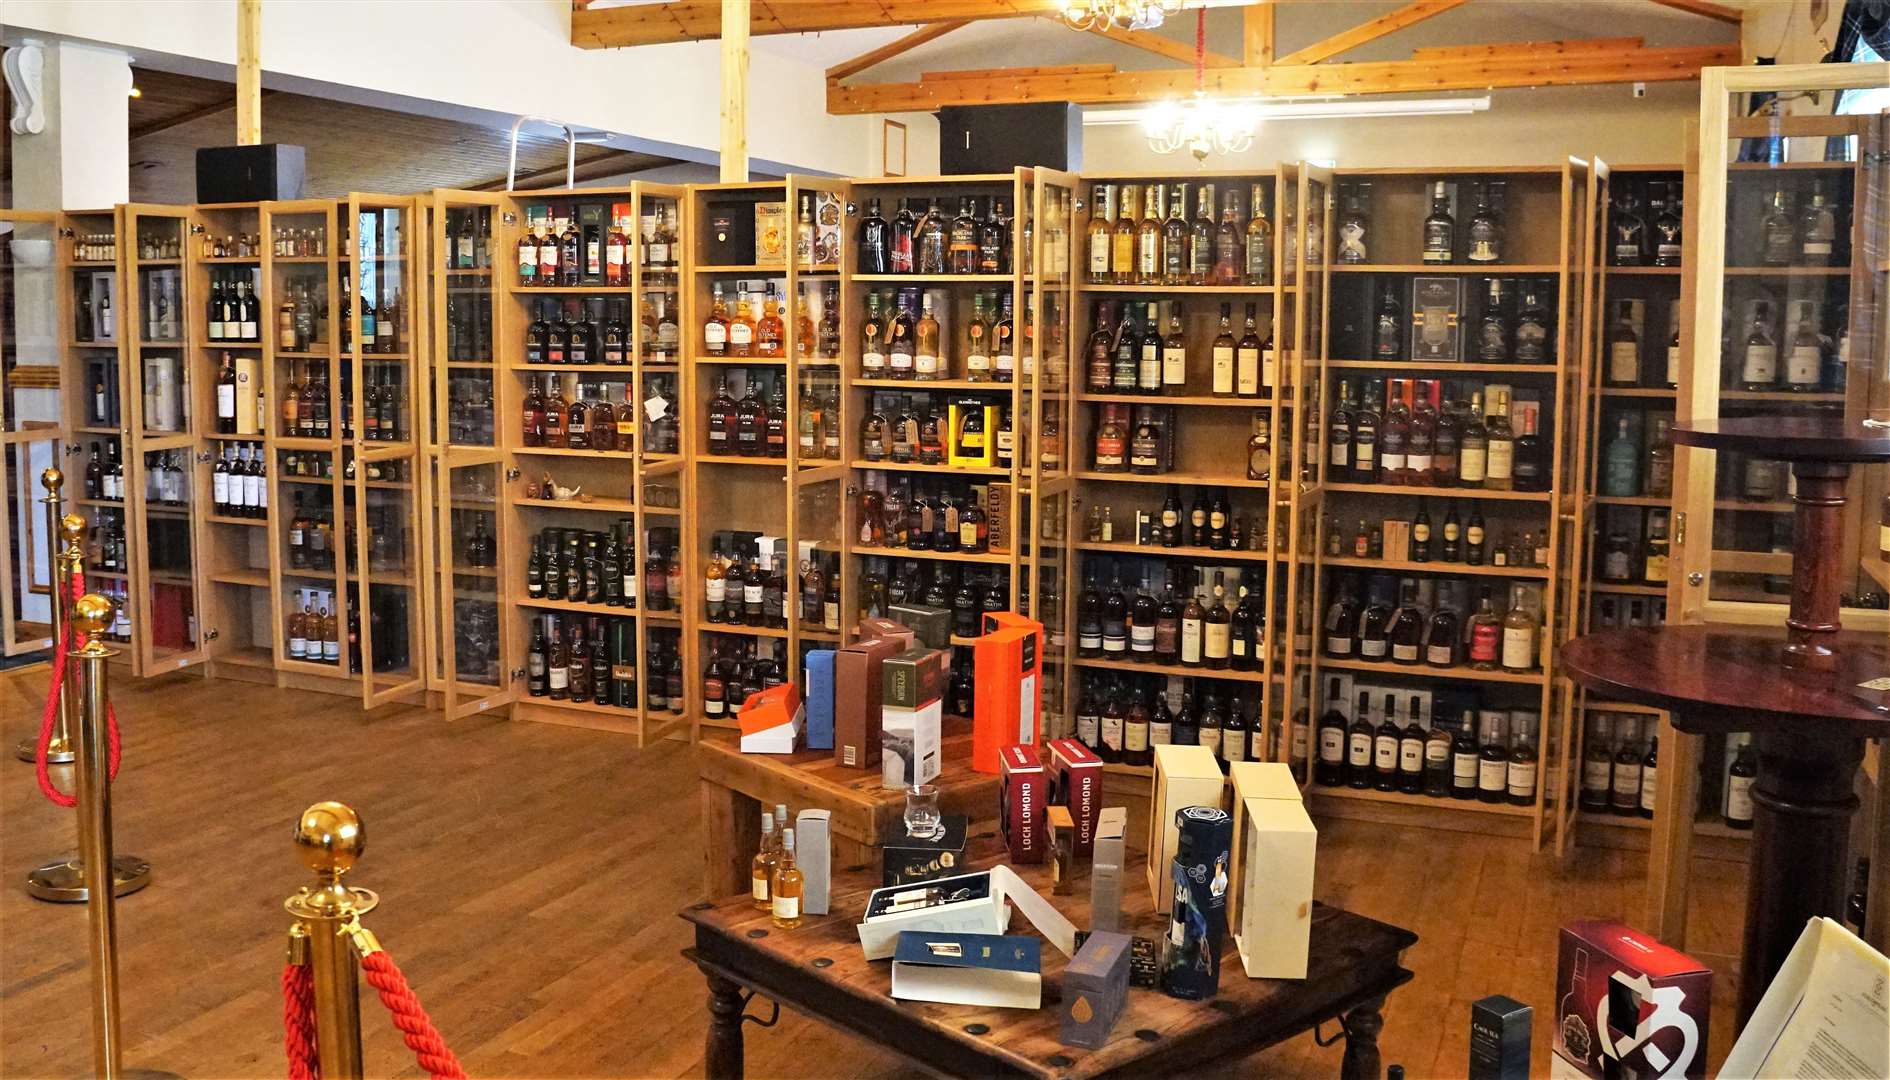 Interior of the hotel showing some of the fine whiskeys it stocks.  Photo: DGS